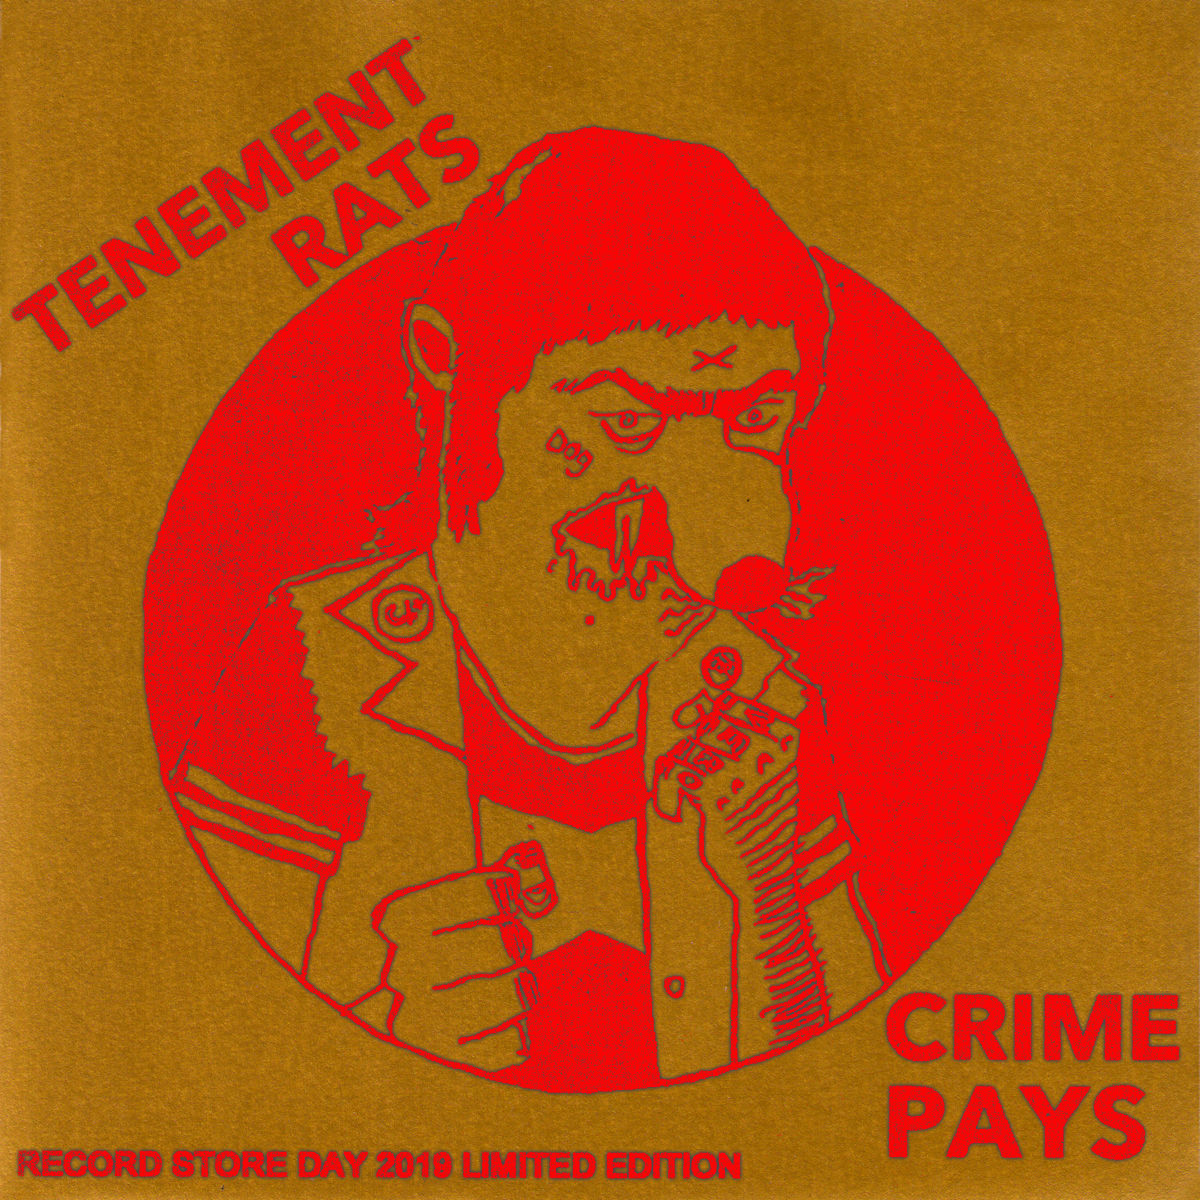 Tenement Rats- Crime Pays 7” ~RARE RECORD STORE DAY COVER LTD TO 20!